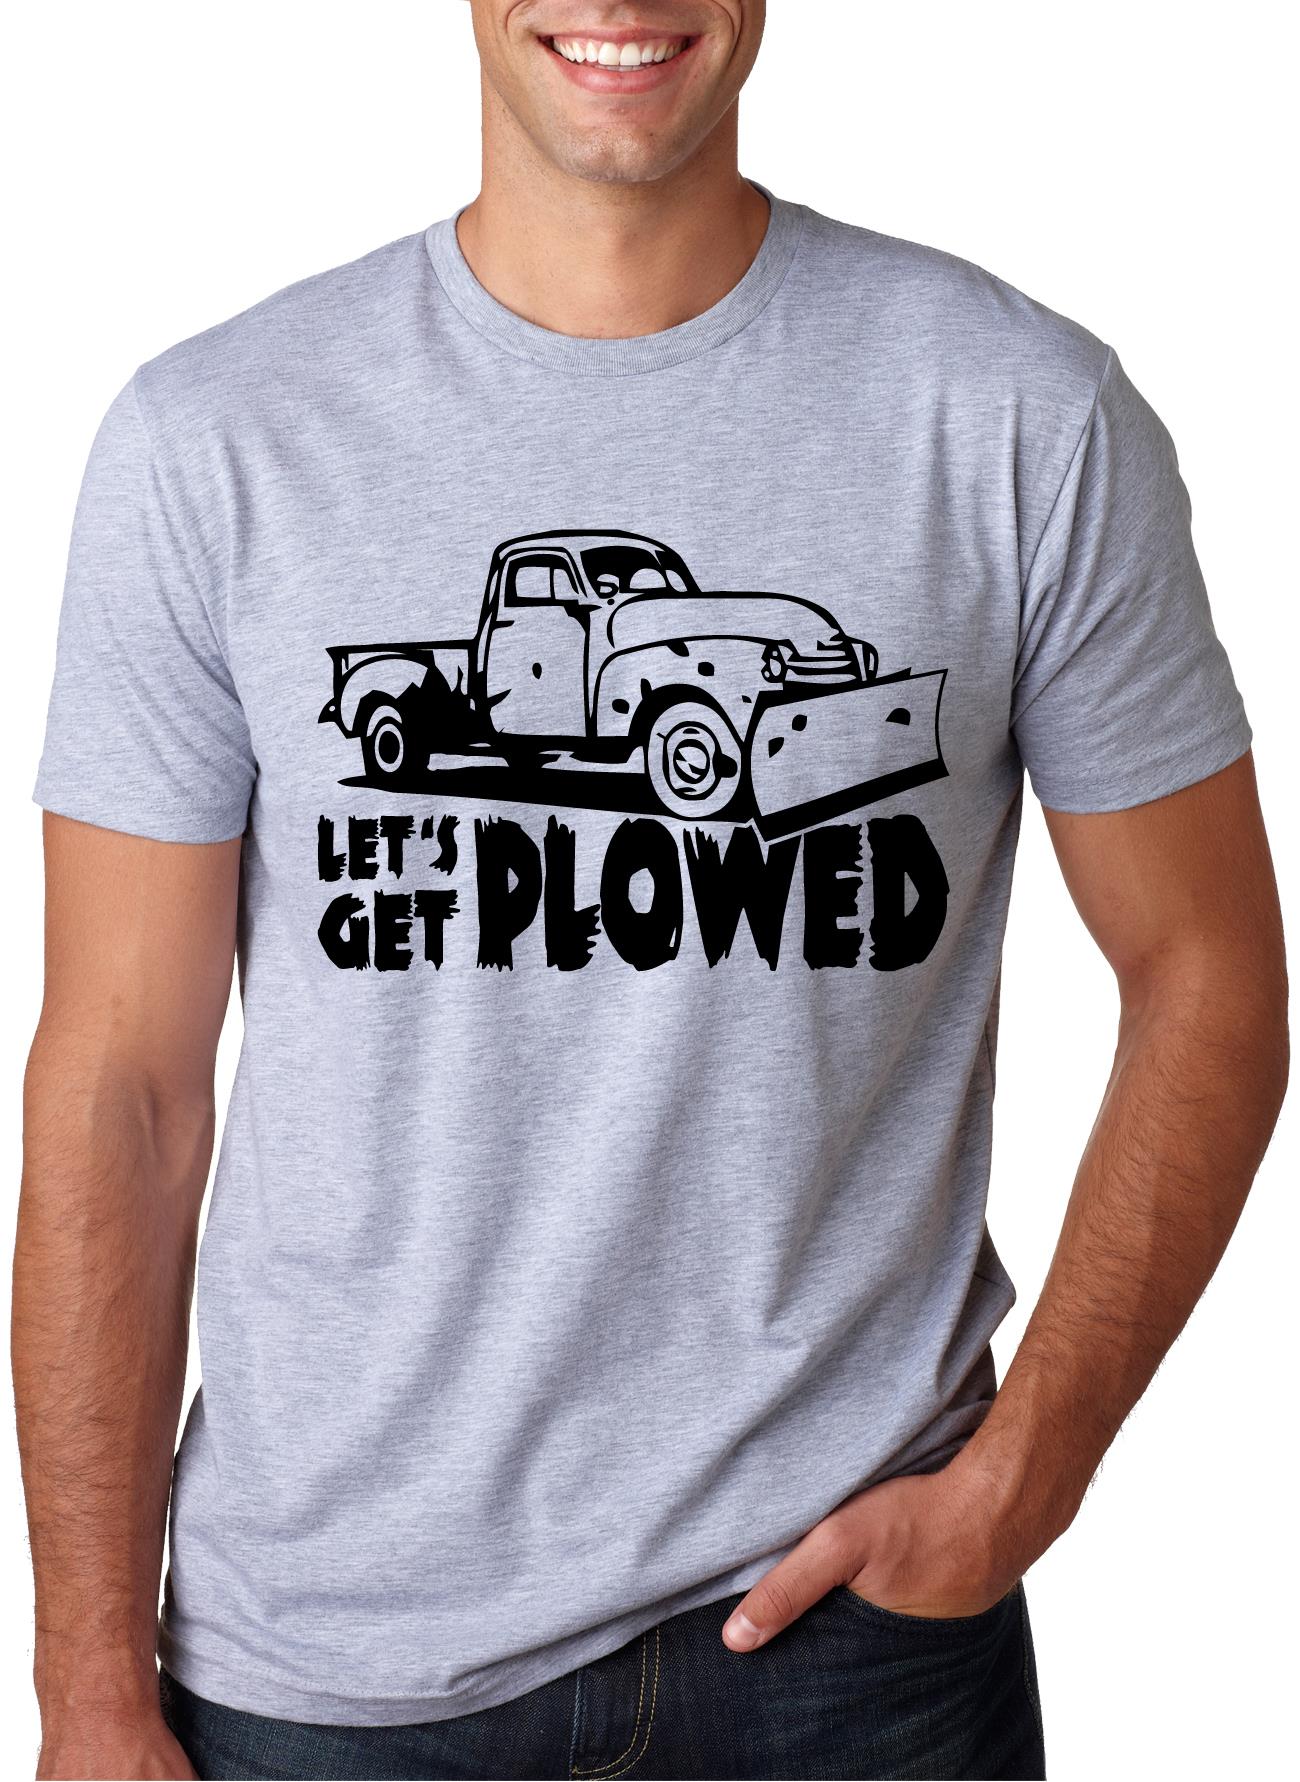 Let's Get Plowed T Shirt Funny Adult Humor Snowy Holiday Tee M 